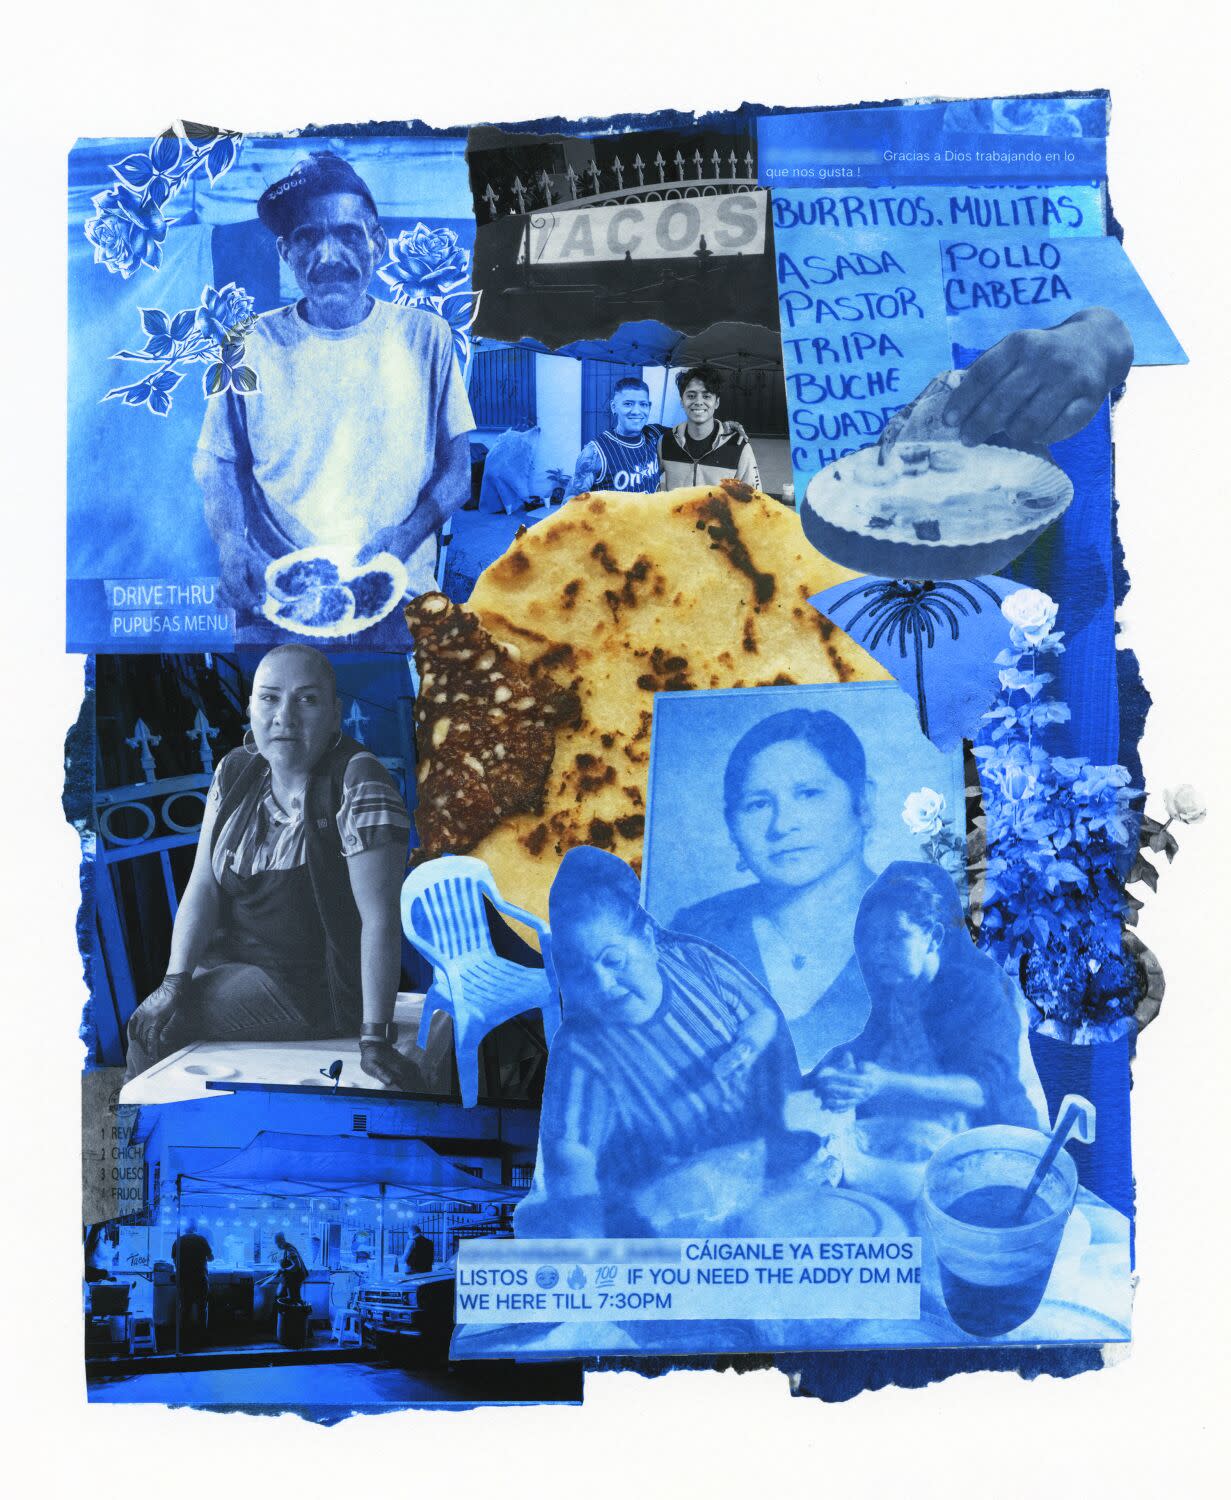 cyanotype prints and digital photography collage depicting food being sold from people's homes